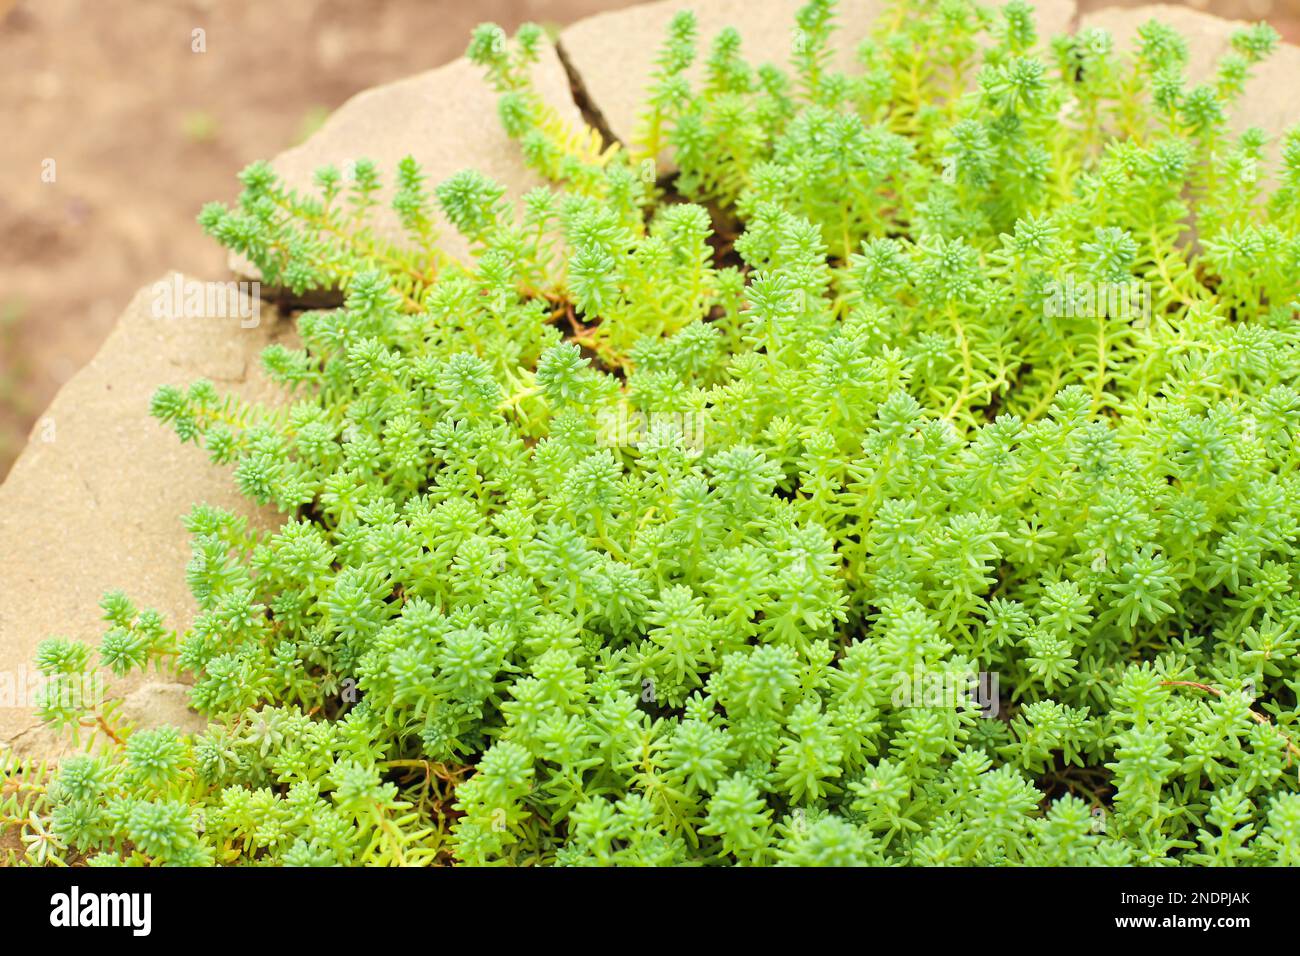 stonecrop sedum texture background and stone. small green succulent plants a lot. top view, full frame Stock Photo